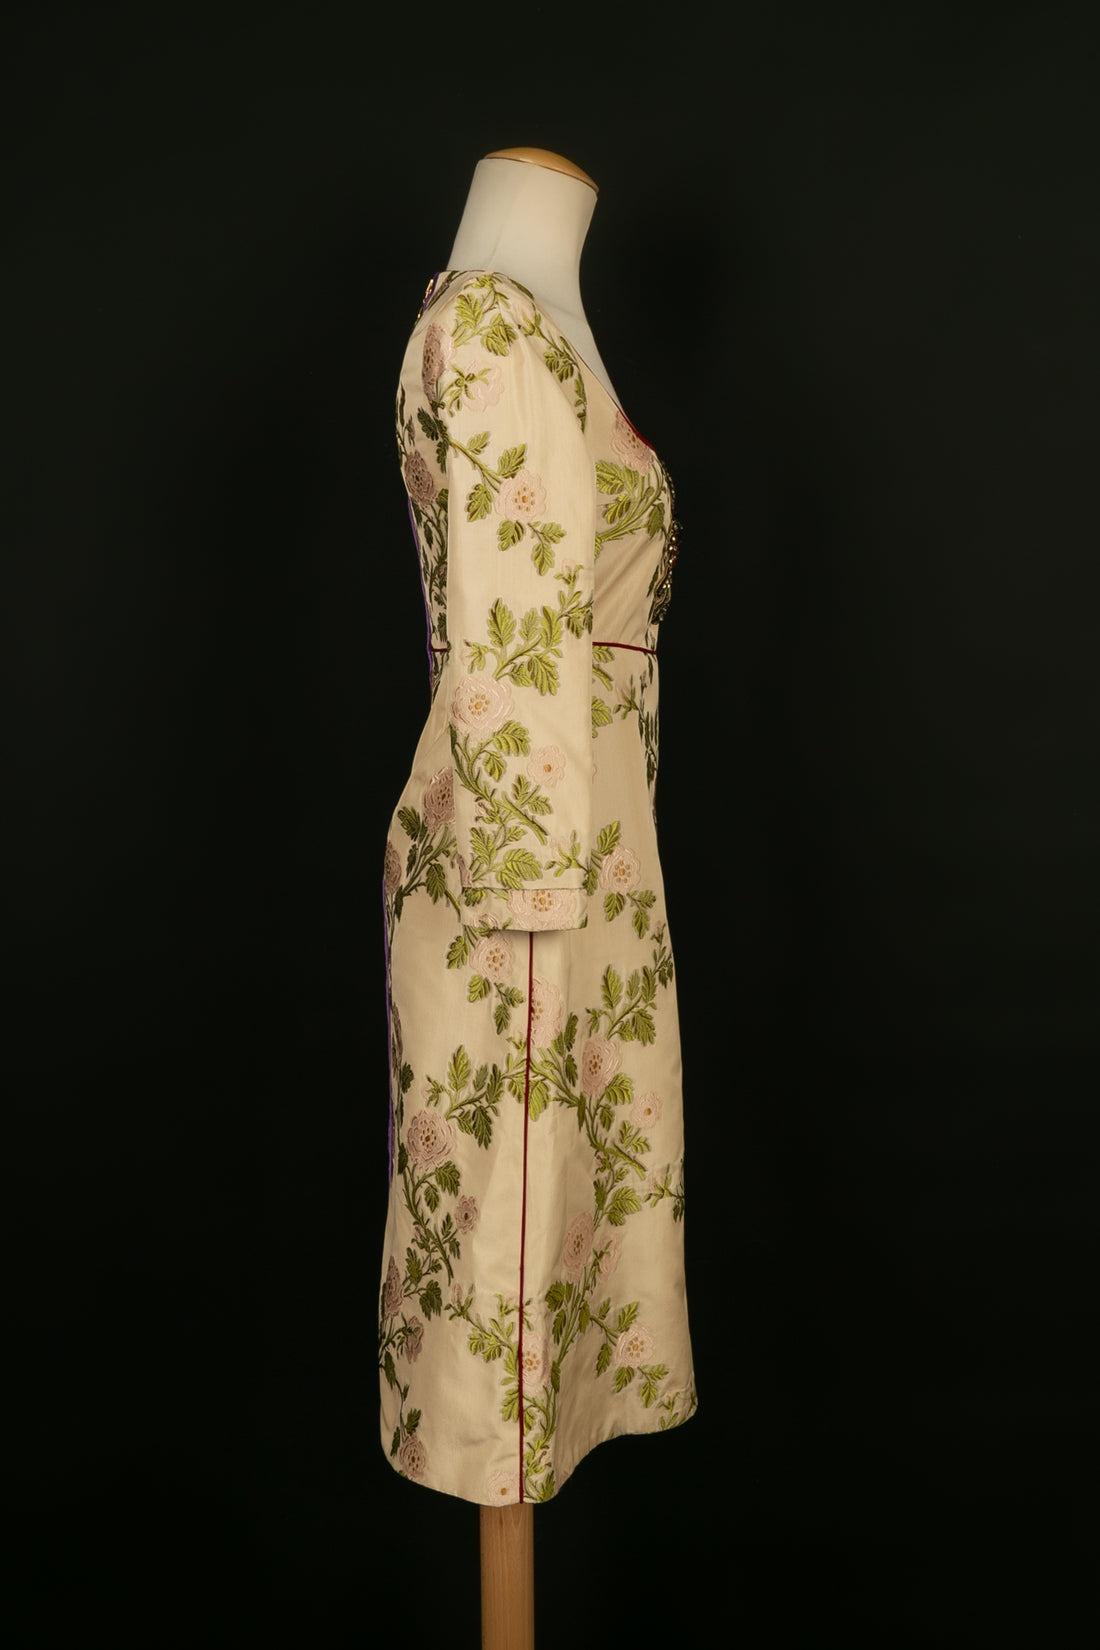 Gucci Mid-Length Dress Pre-Fall with Floral Patterns, 2016 For Sale 1